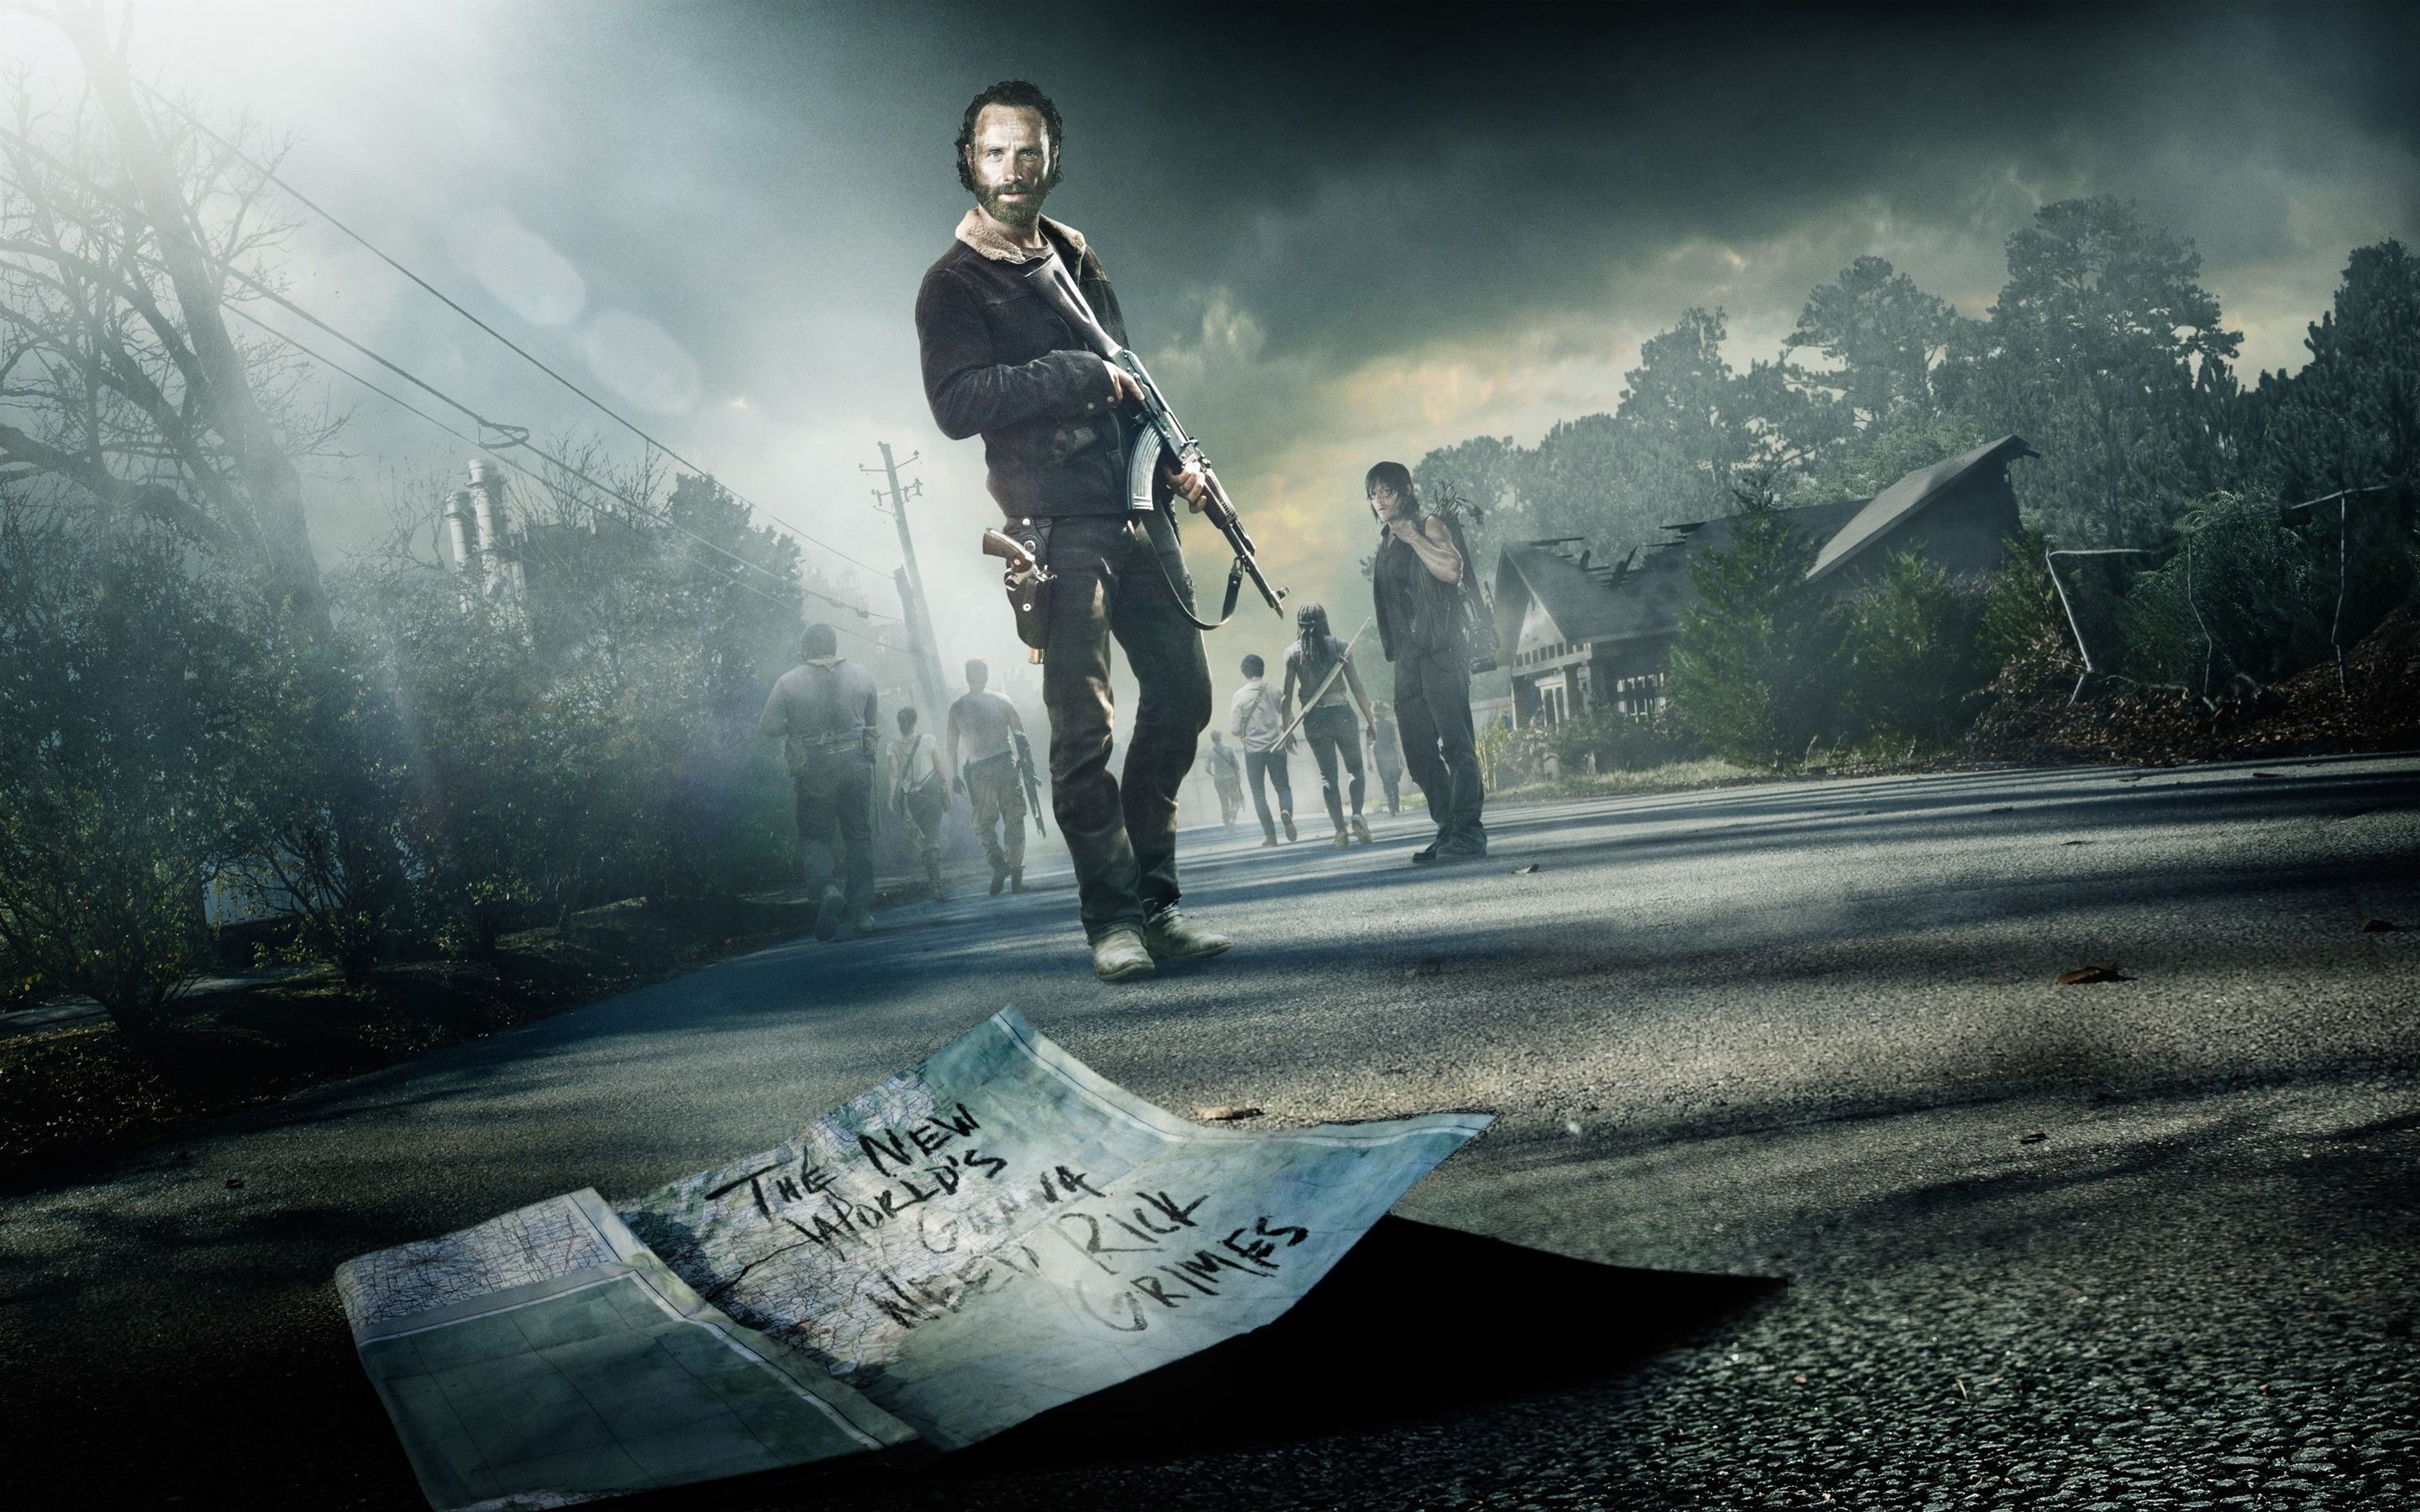 583 The Walking Dead HD Wallpapers Backgrounds - Wallpaper Abyss